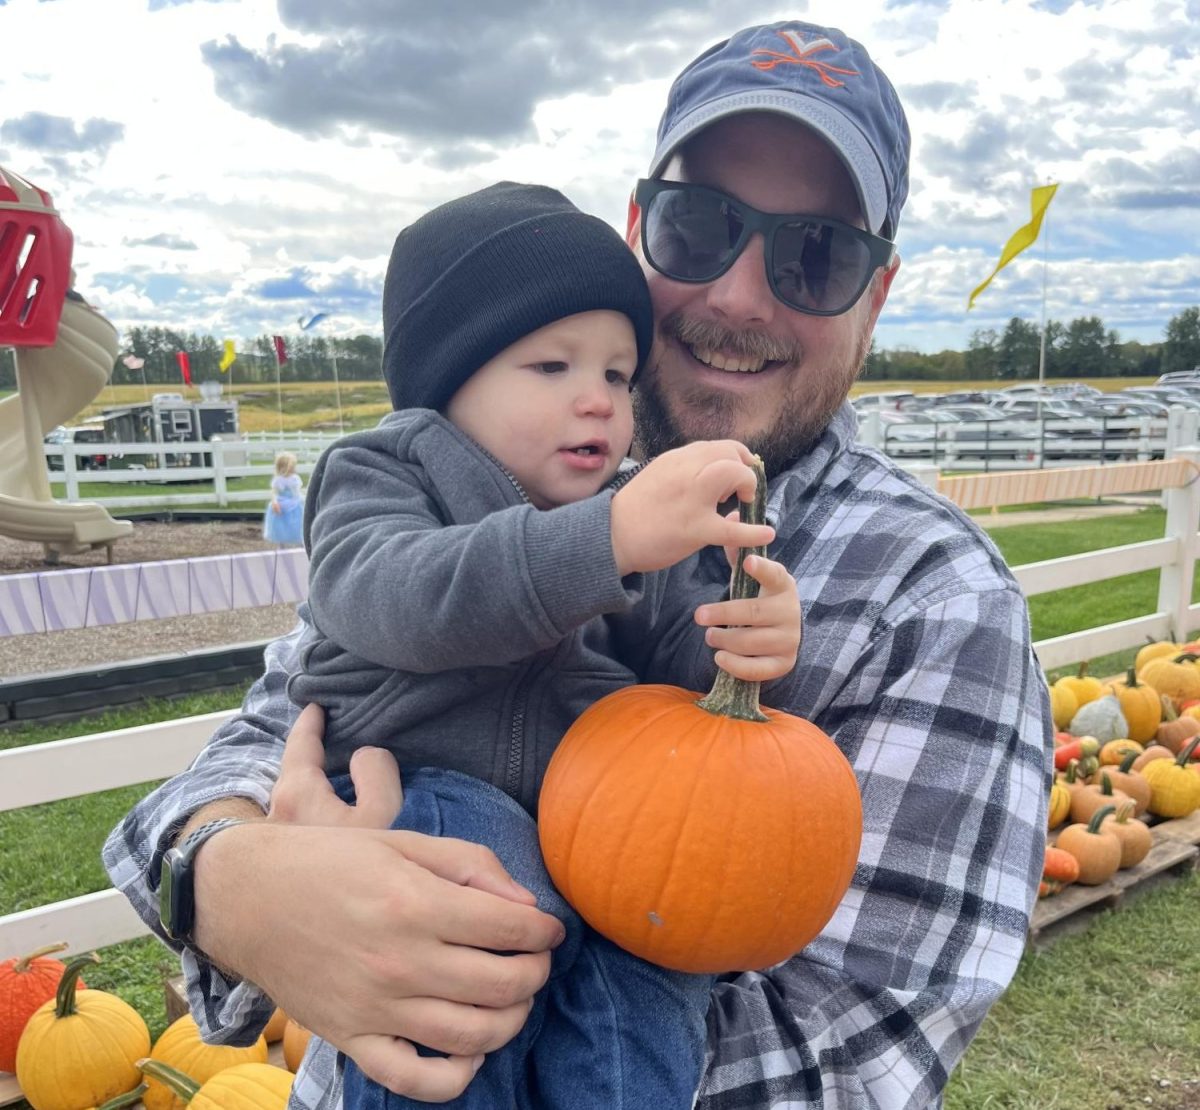 Student Activities and Engagement Coordinator Brad Burzumato holds his son in a pumpkin patch. Photo courtesy of Brad Burzumato.